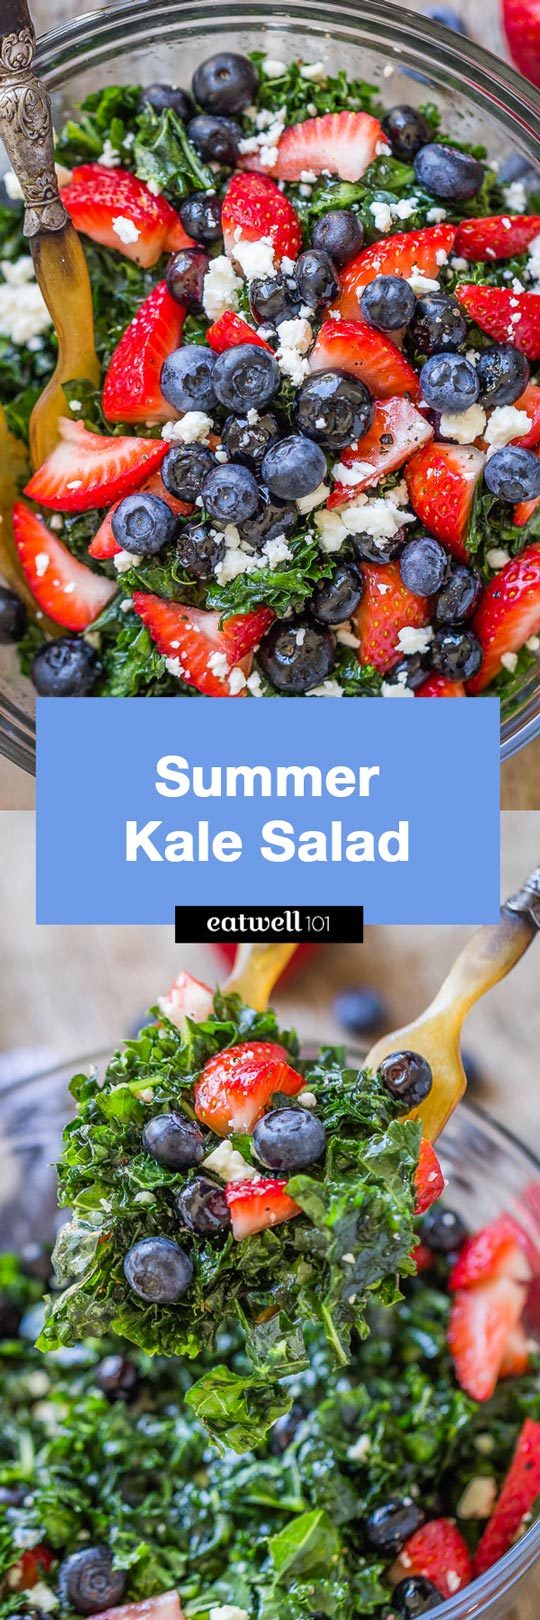 Summer Kale Salad - Healthy, tasty and super nutritive, if you’re looking for the perfect summer salad, this is it!